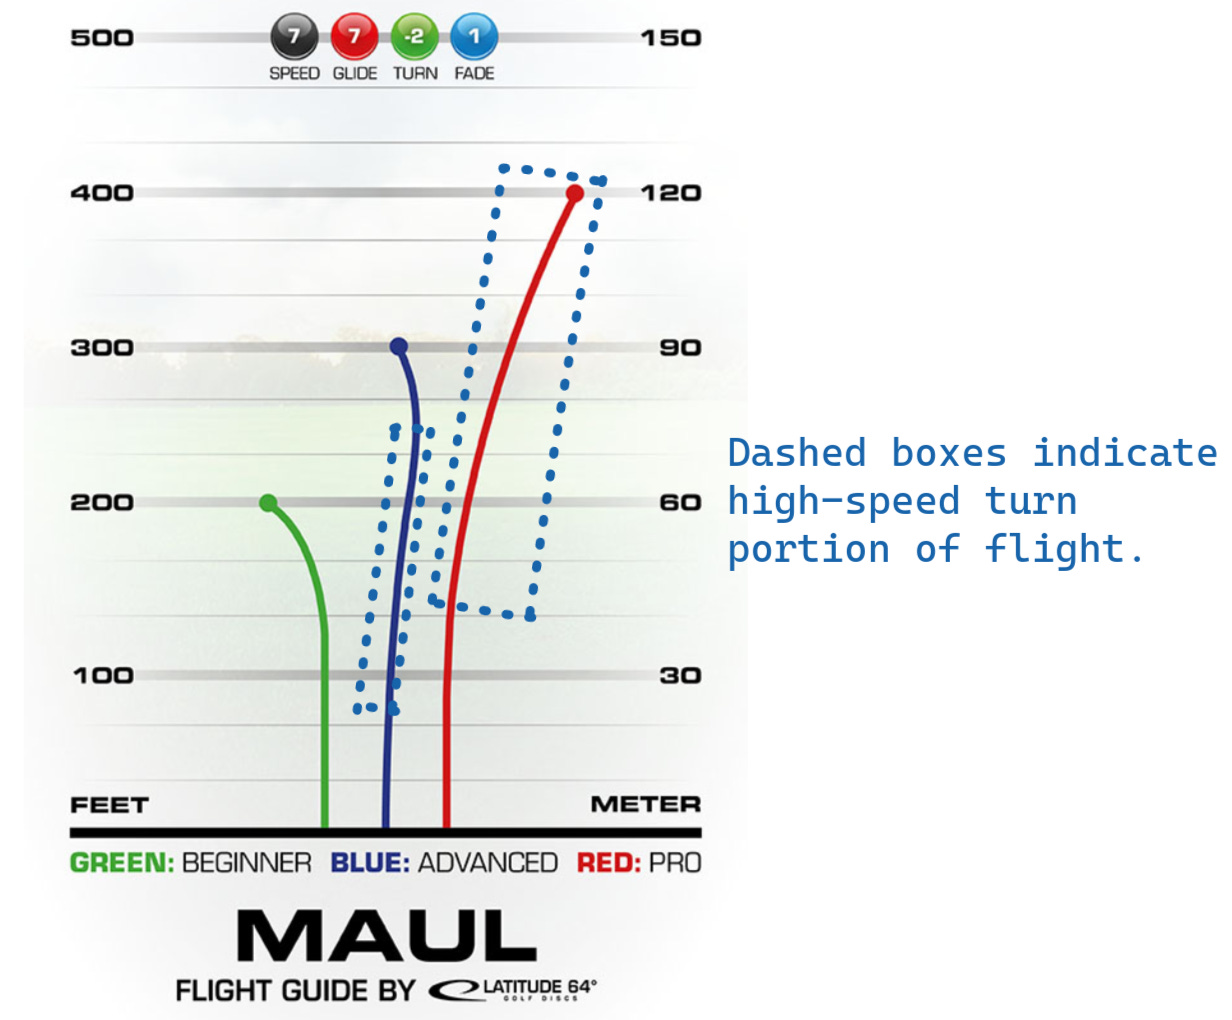 Top view of flight patterns for the Latitude 64 Maul.